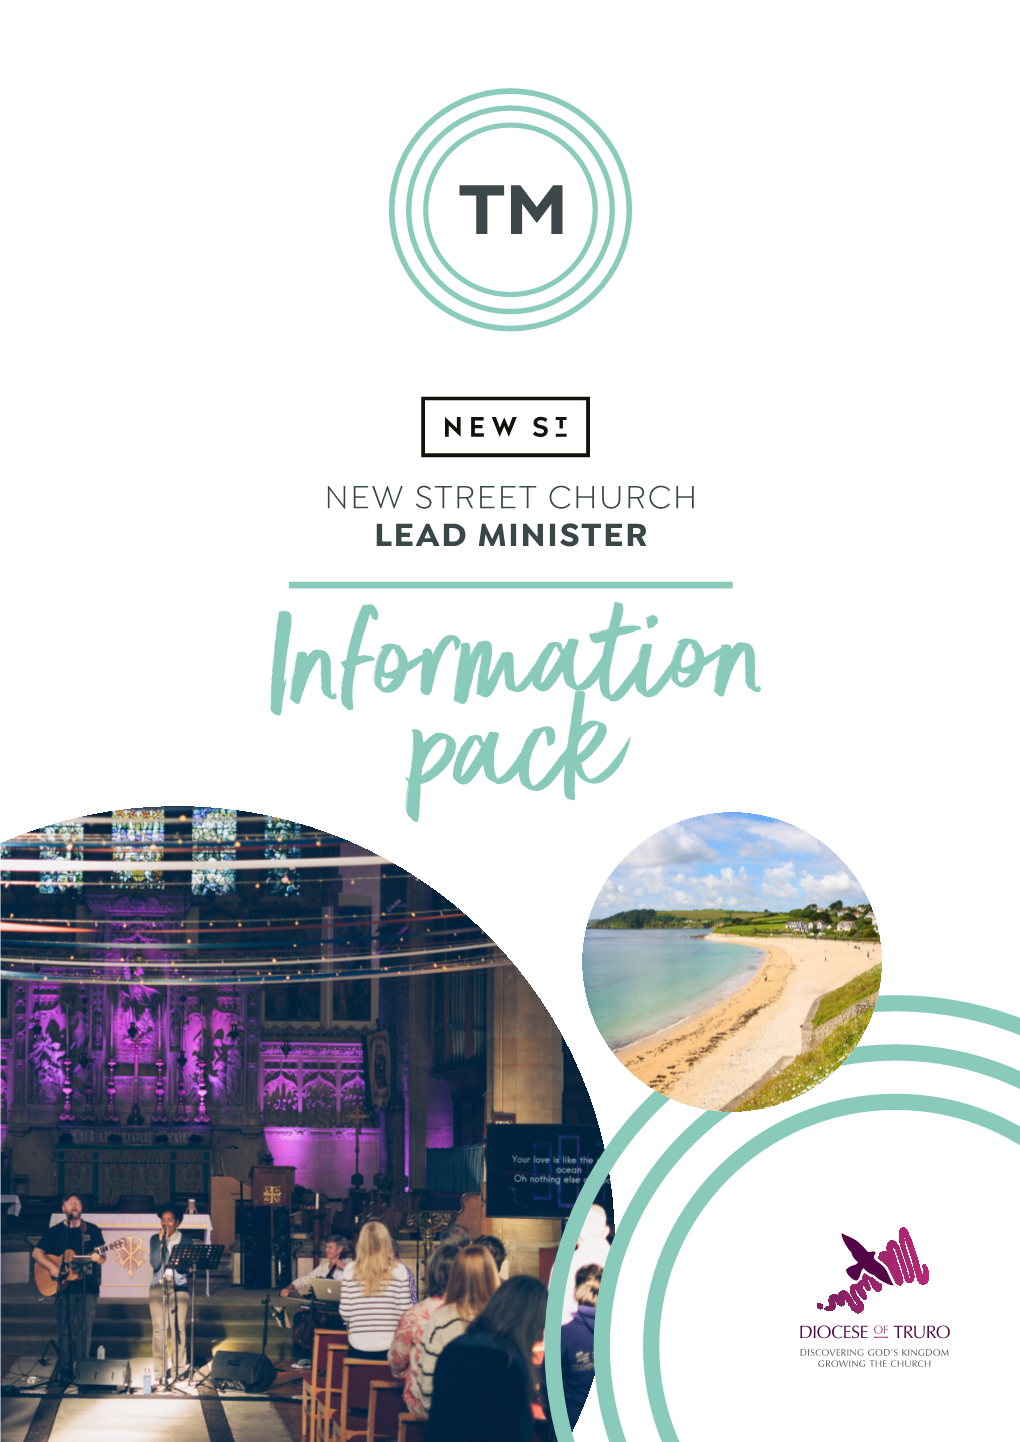 NEW STREET CHURCH LEAD MINISTER Information Pack Contents